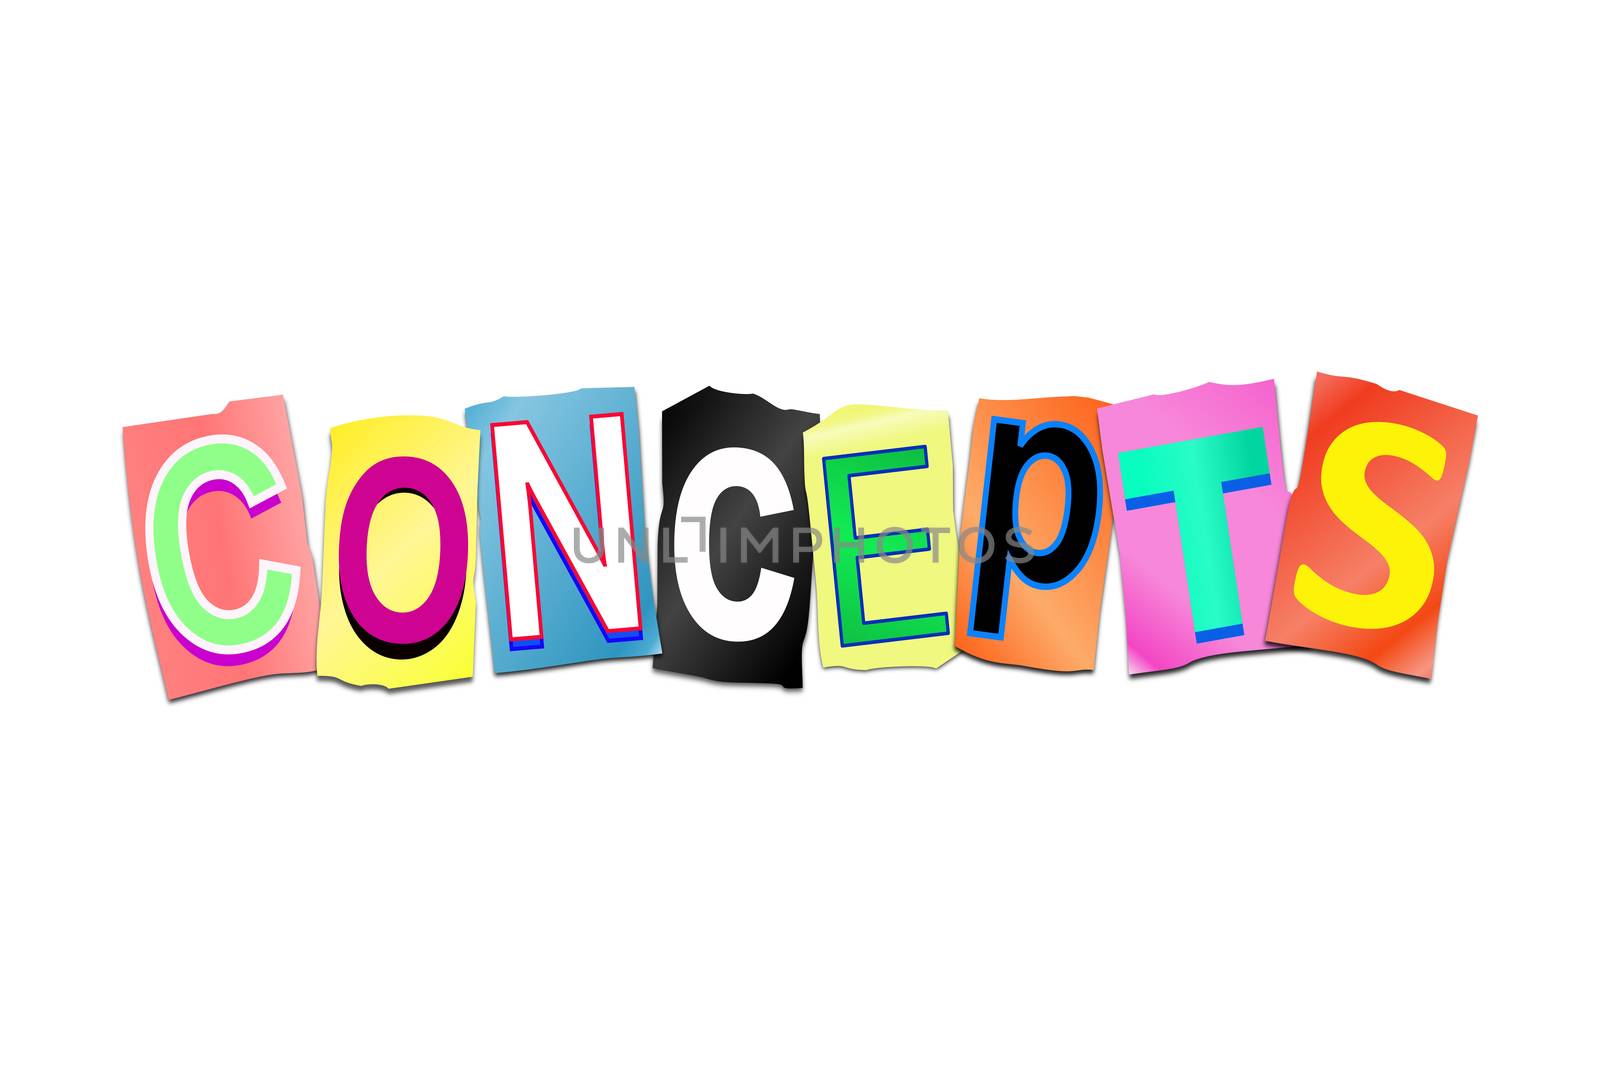 Illustration depicting a set of cut out printed letters arranged to form the word concept.